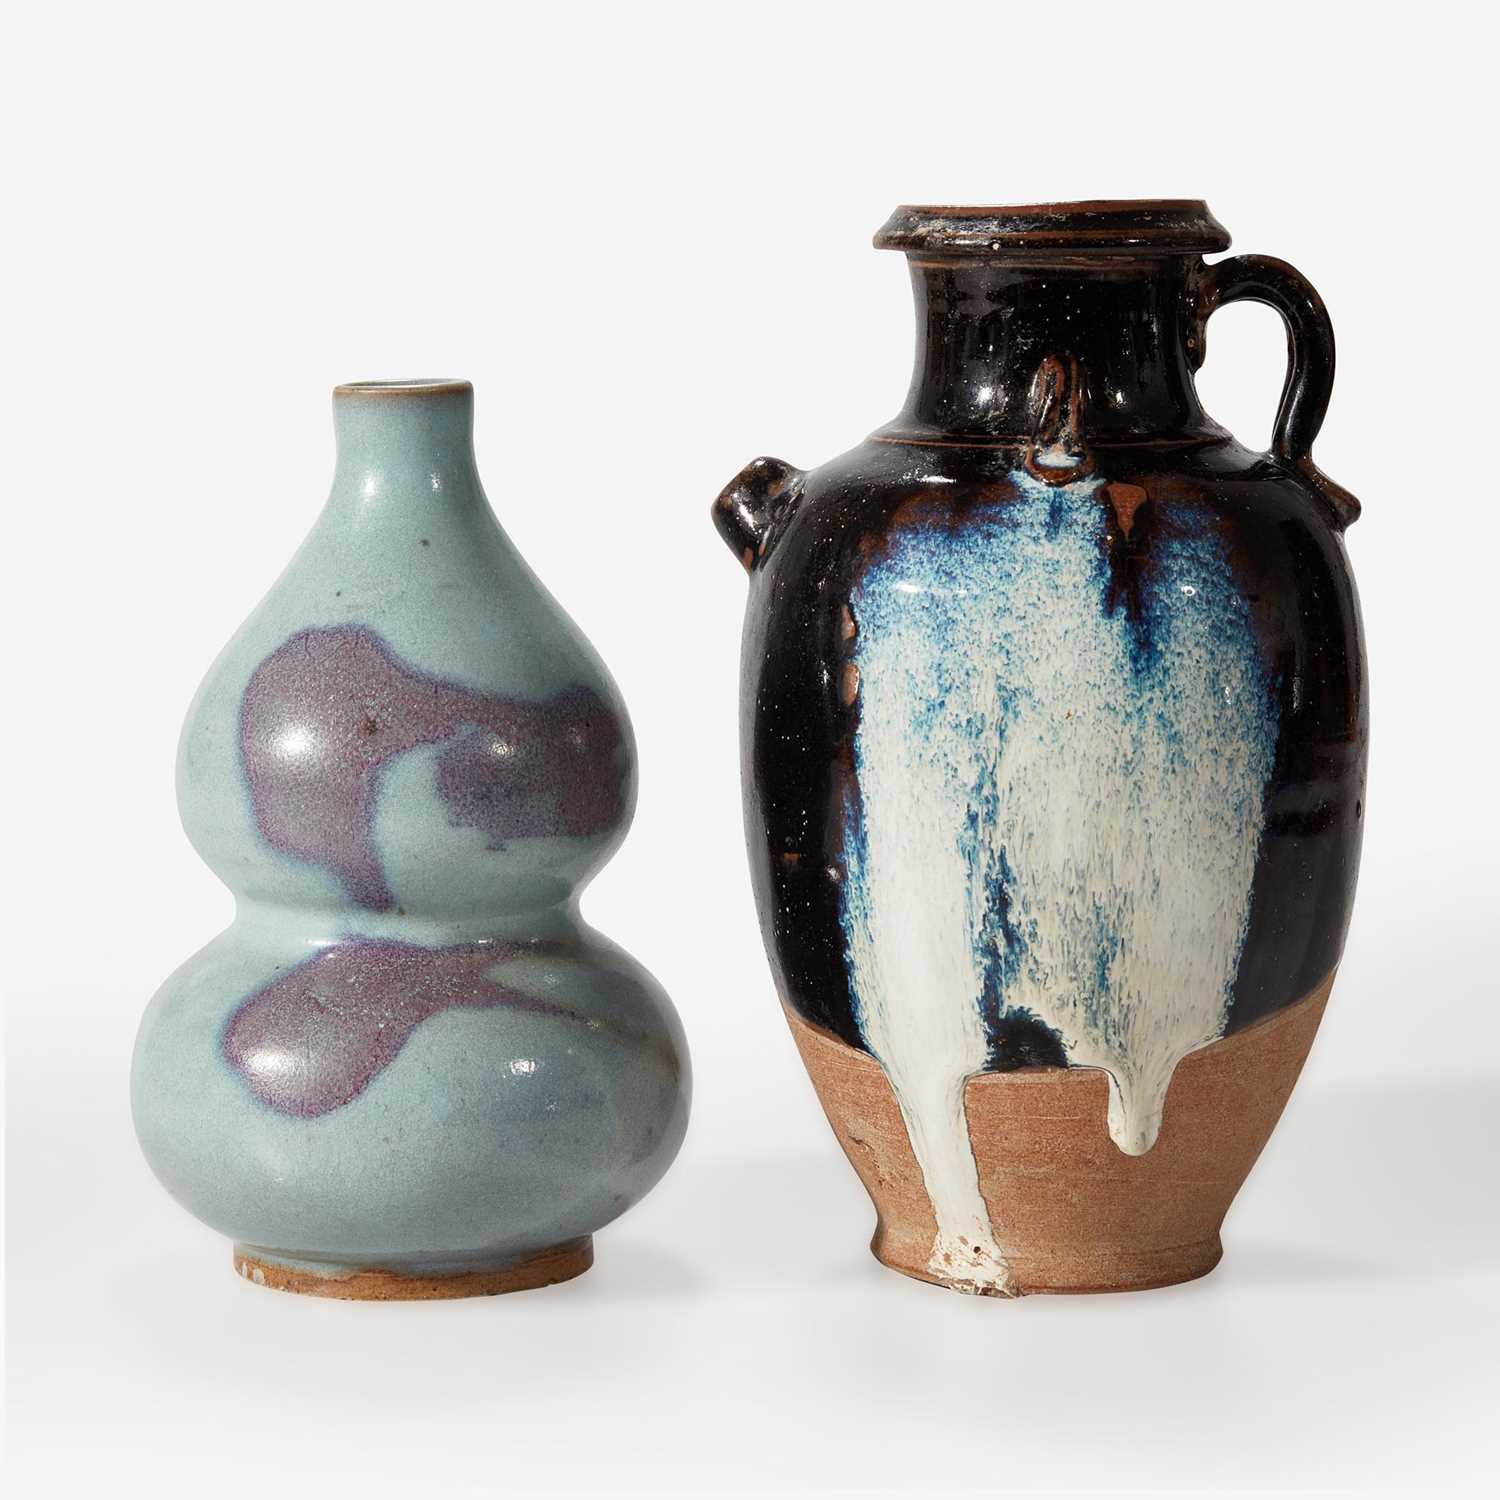 Lot 8 - A Chinese Junyao style vase and a phosphatic-splashed ewer